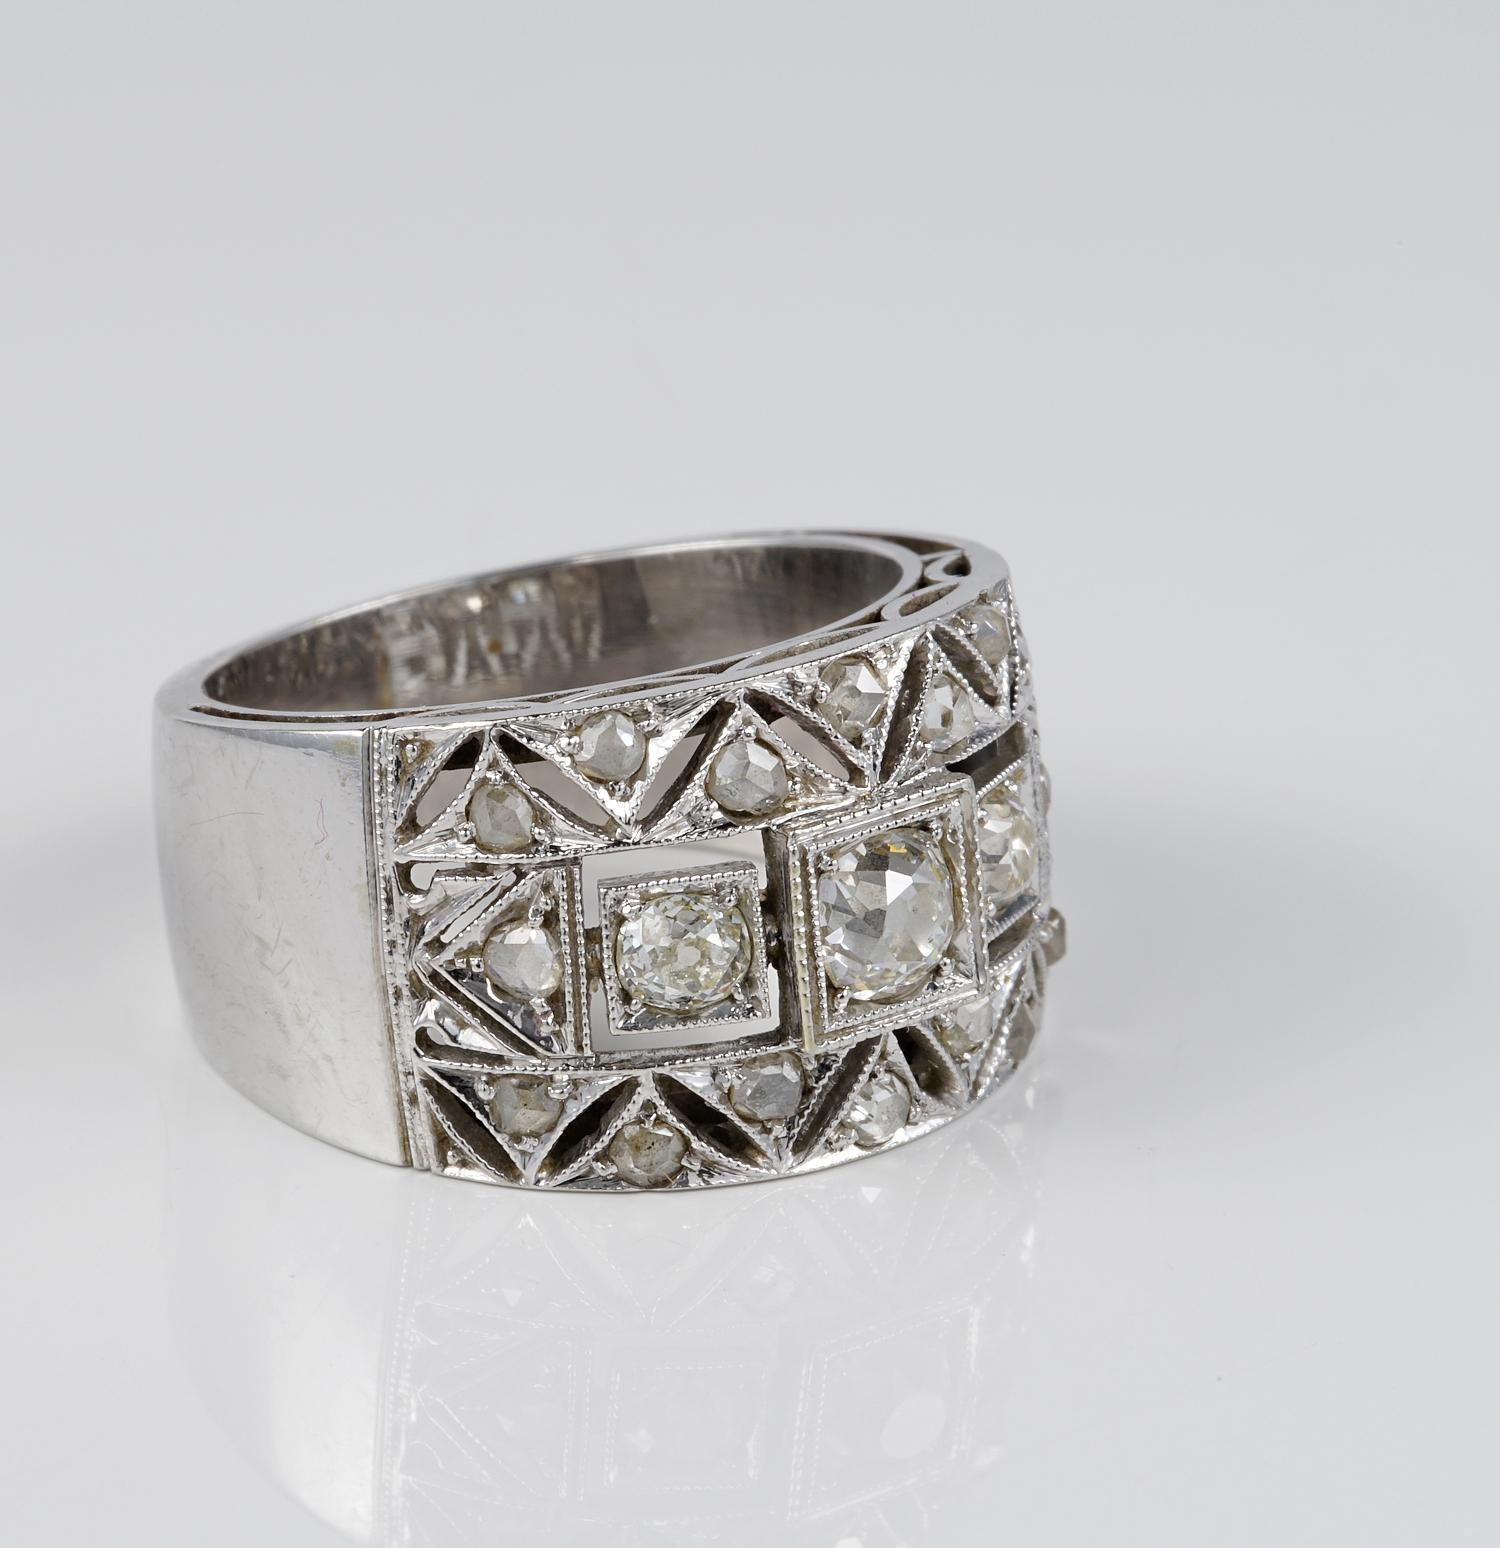 This pretty antique wide band ring is Art Deco period, 1920 ca
Exquisitely hand crafted as unique of solid 18 Kt white gold
Skillfully crafted in an amazing pierced work frontal panel with cut a jour geometric pattern work enhanced by Diamonds and